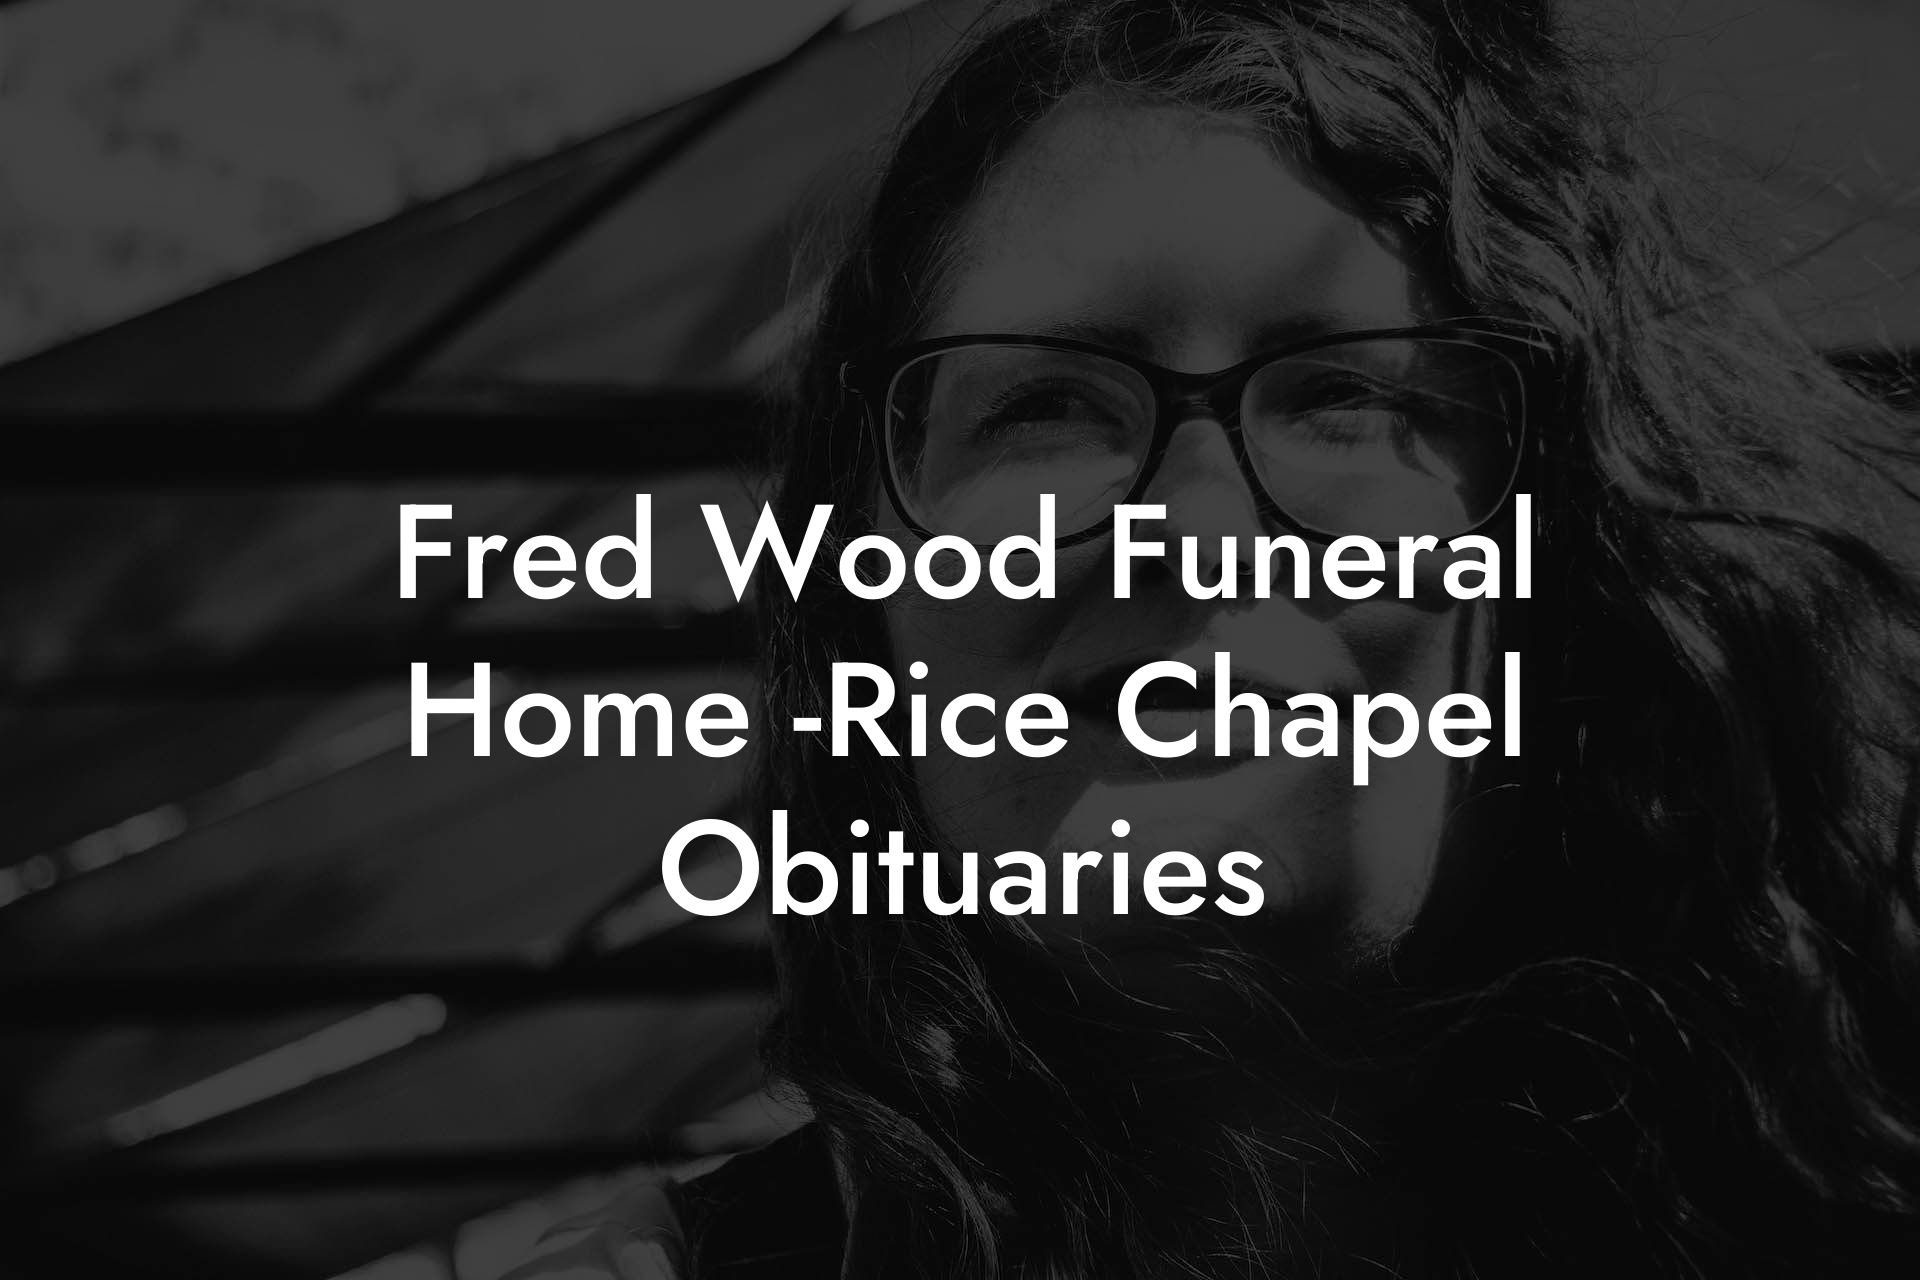 Fred Wood Funeral Home -Rice Chapel Obituaries